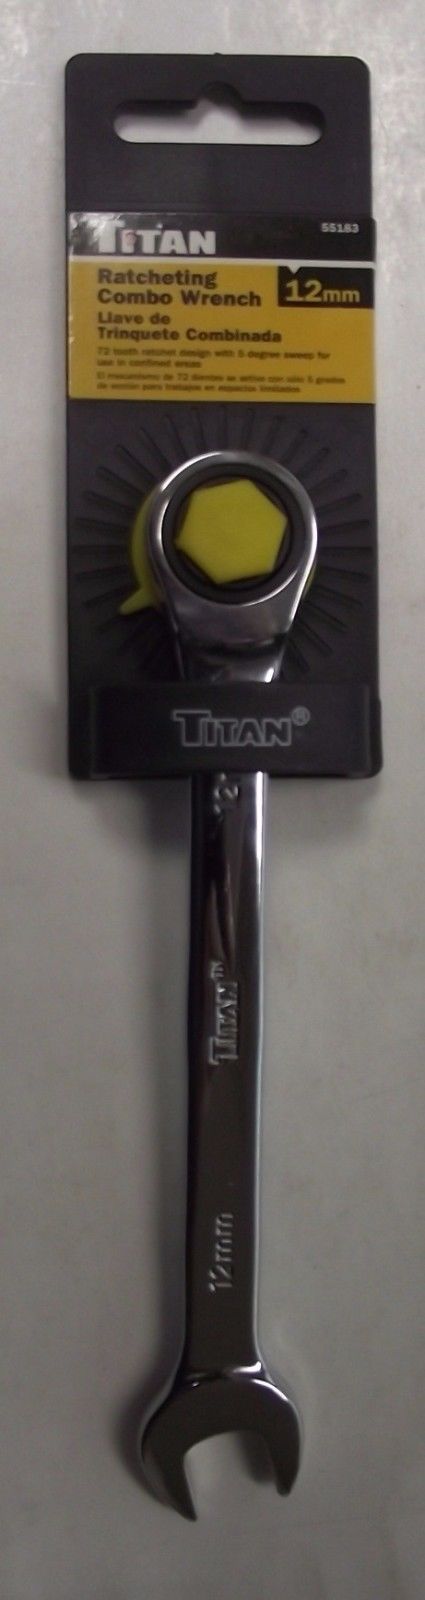 Titan 55183 12mm Ratcheting Combo Wrench 72 Tooth